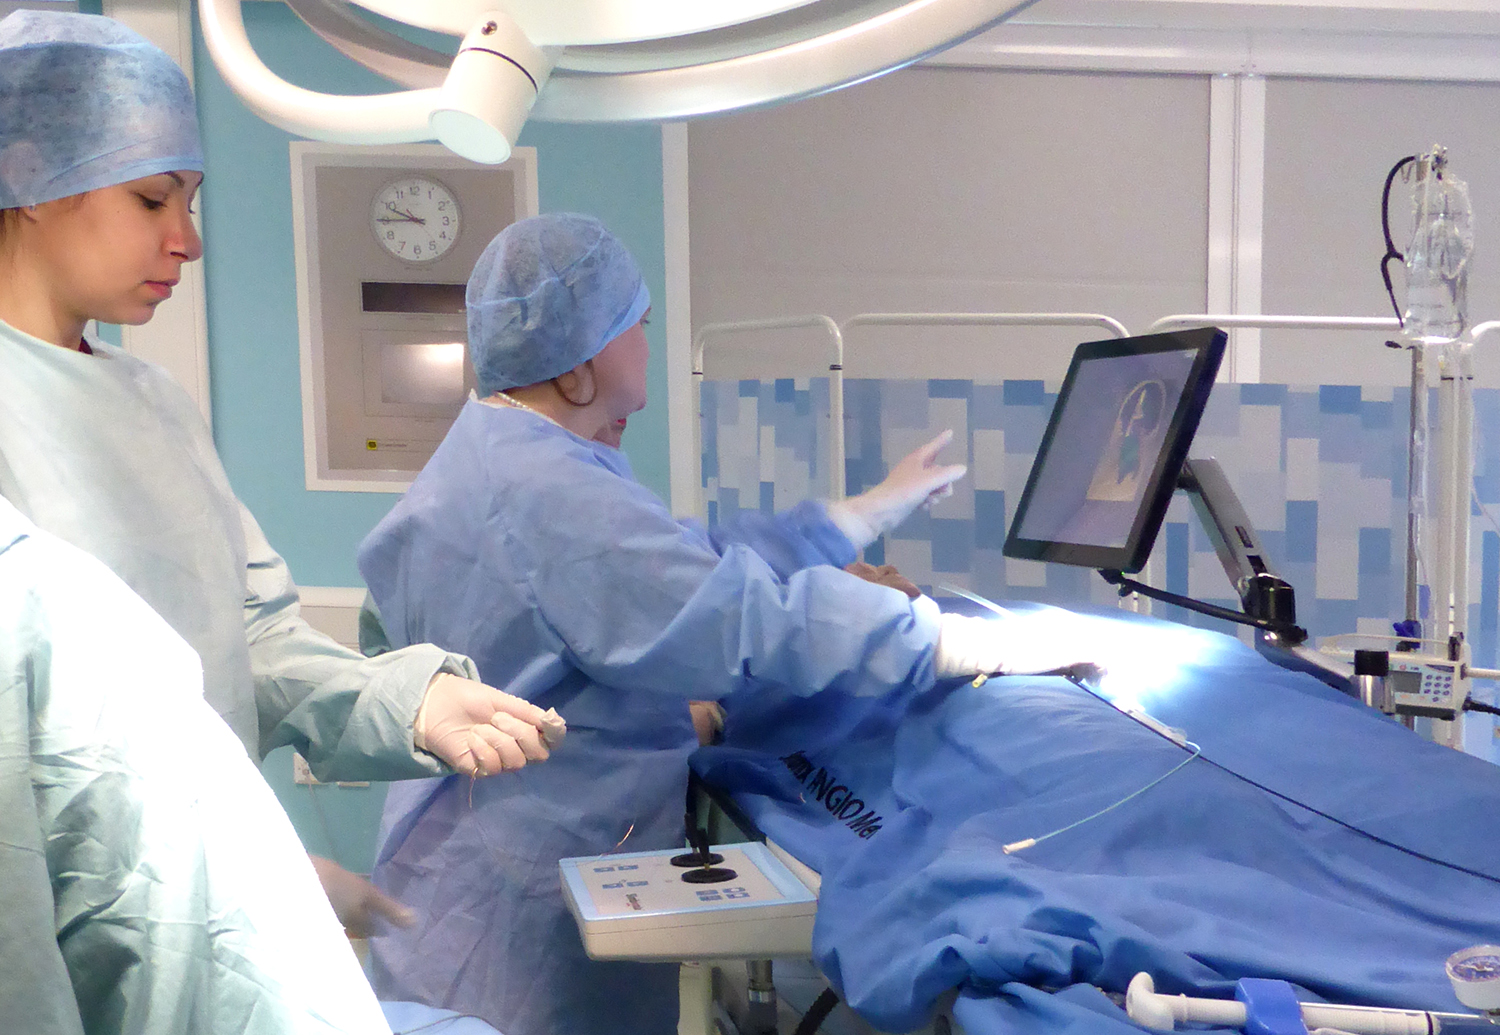 Southend University Hospital established an innovative interventional stroke service using the ANGIO Mentor Suite simulator at Anglia Ruskin University